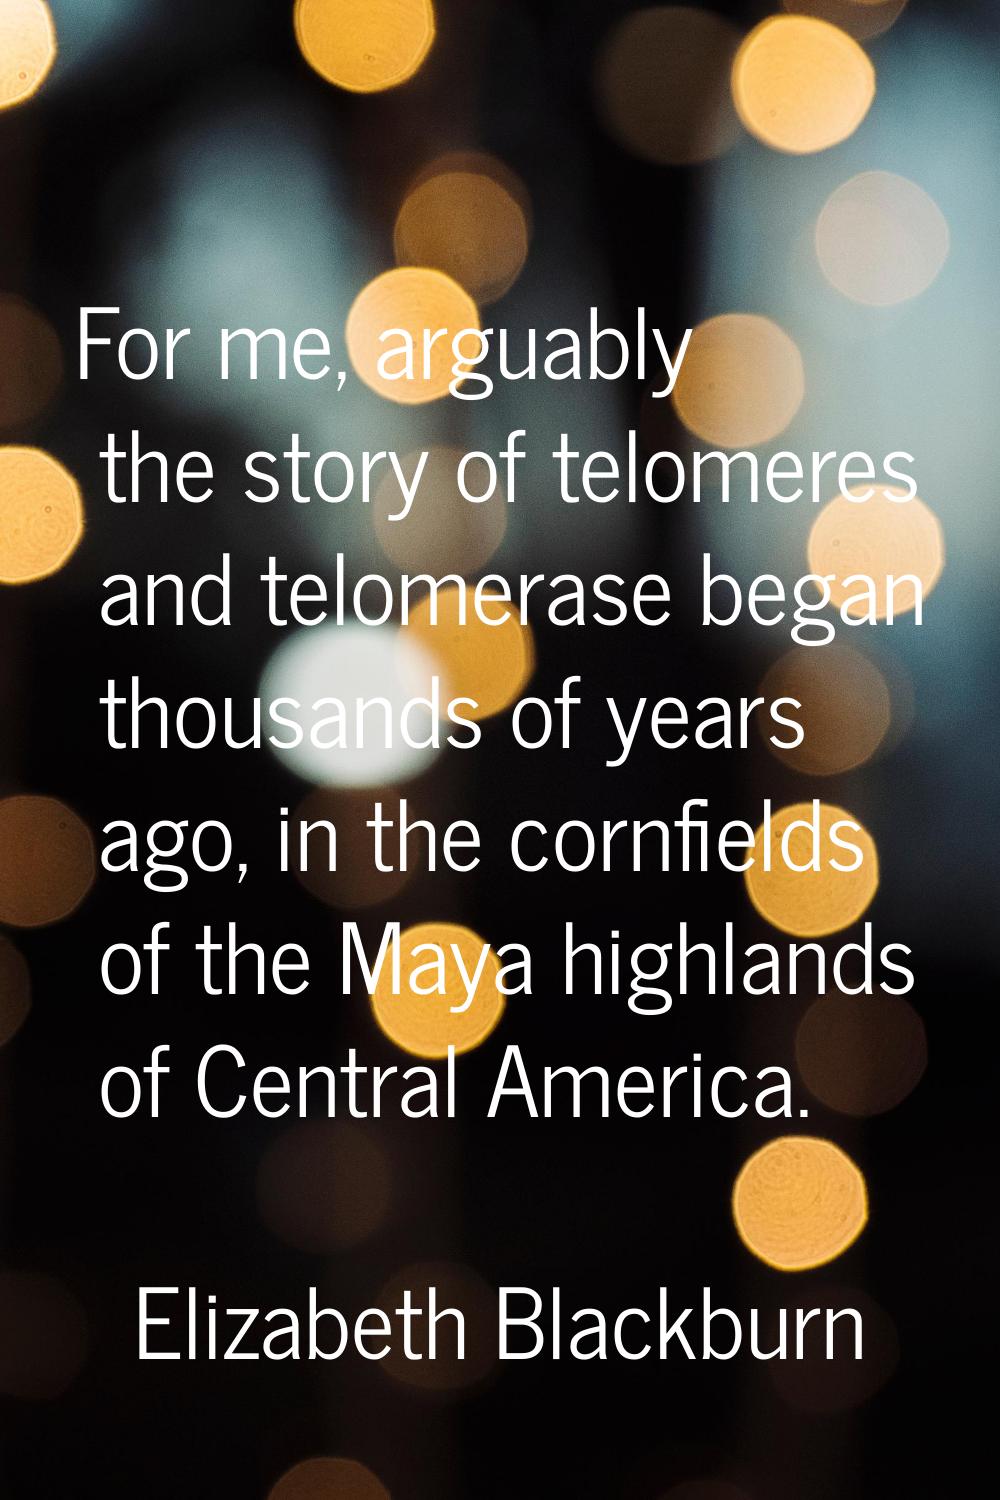 For me, arguably the story of telomeres and telomerase began thousands of years ago, in the cornfie